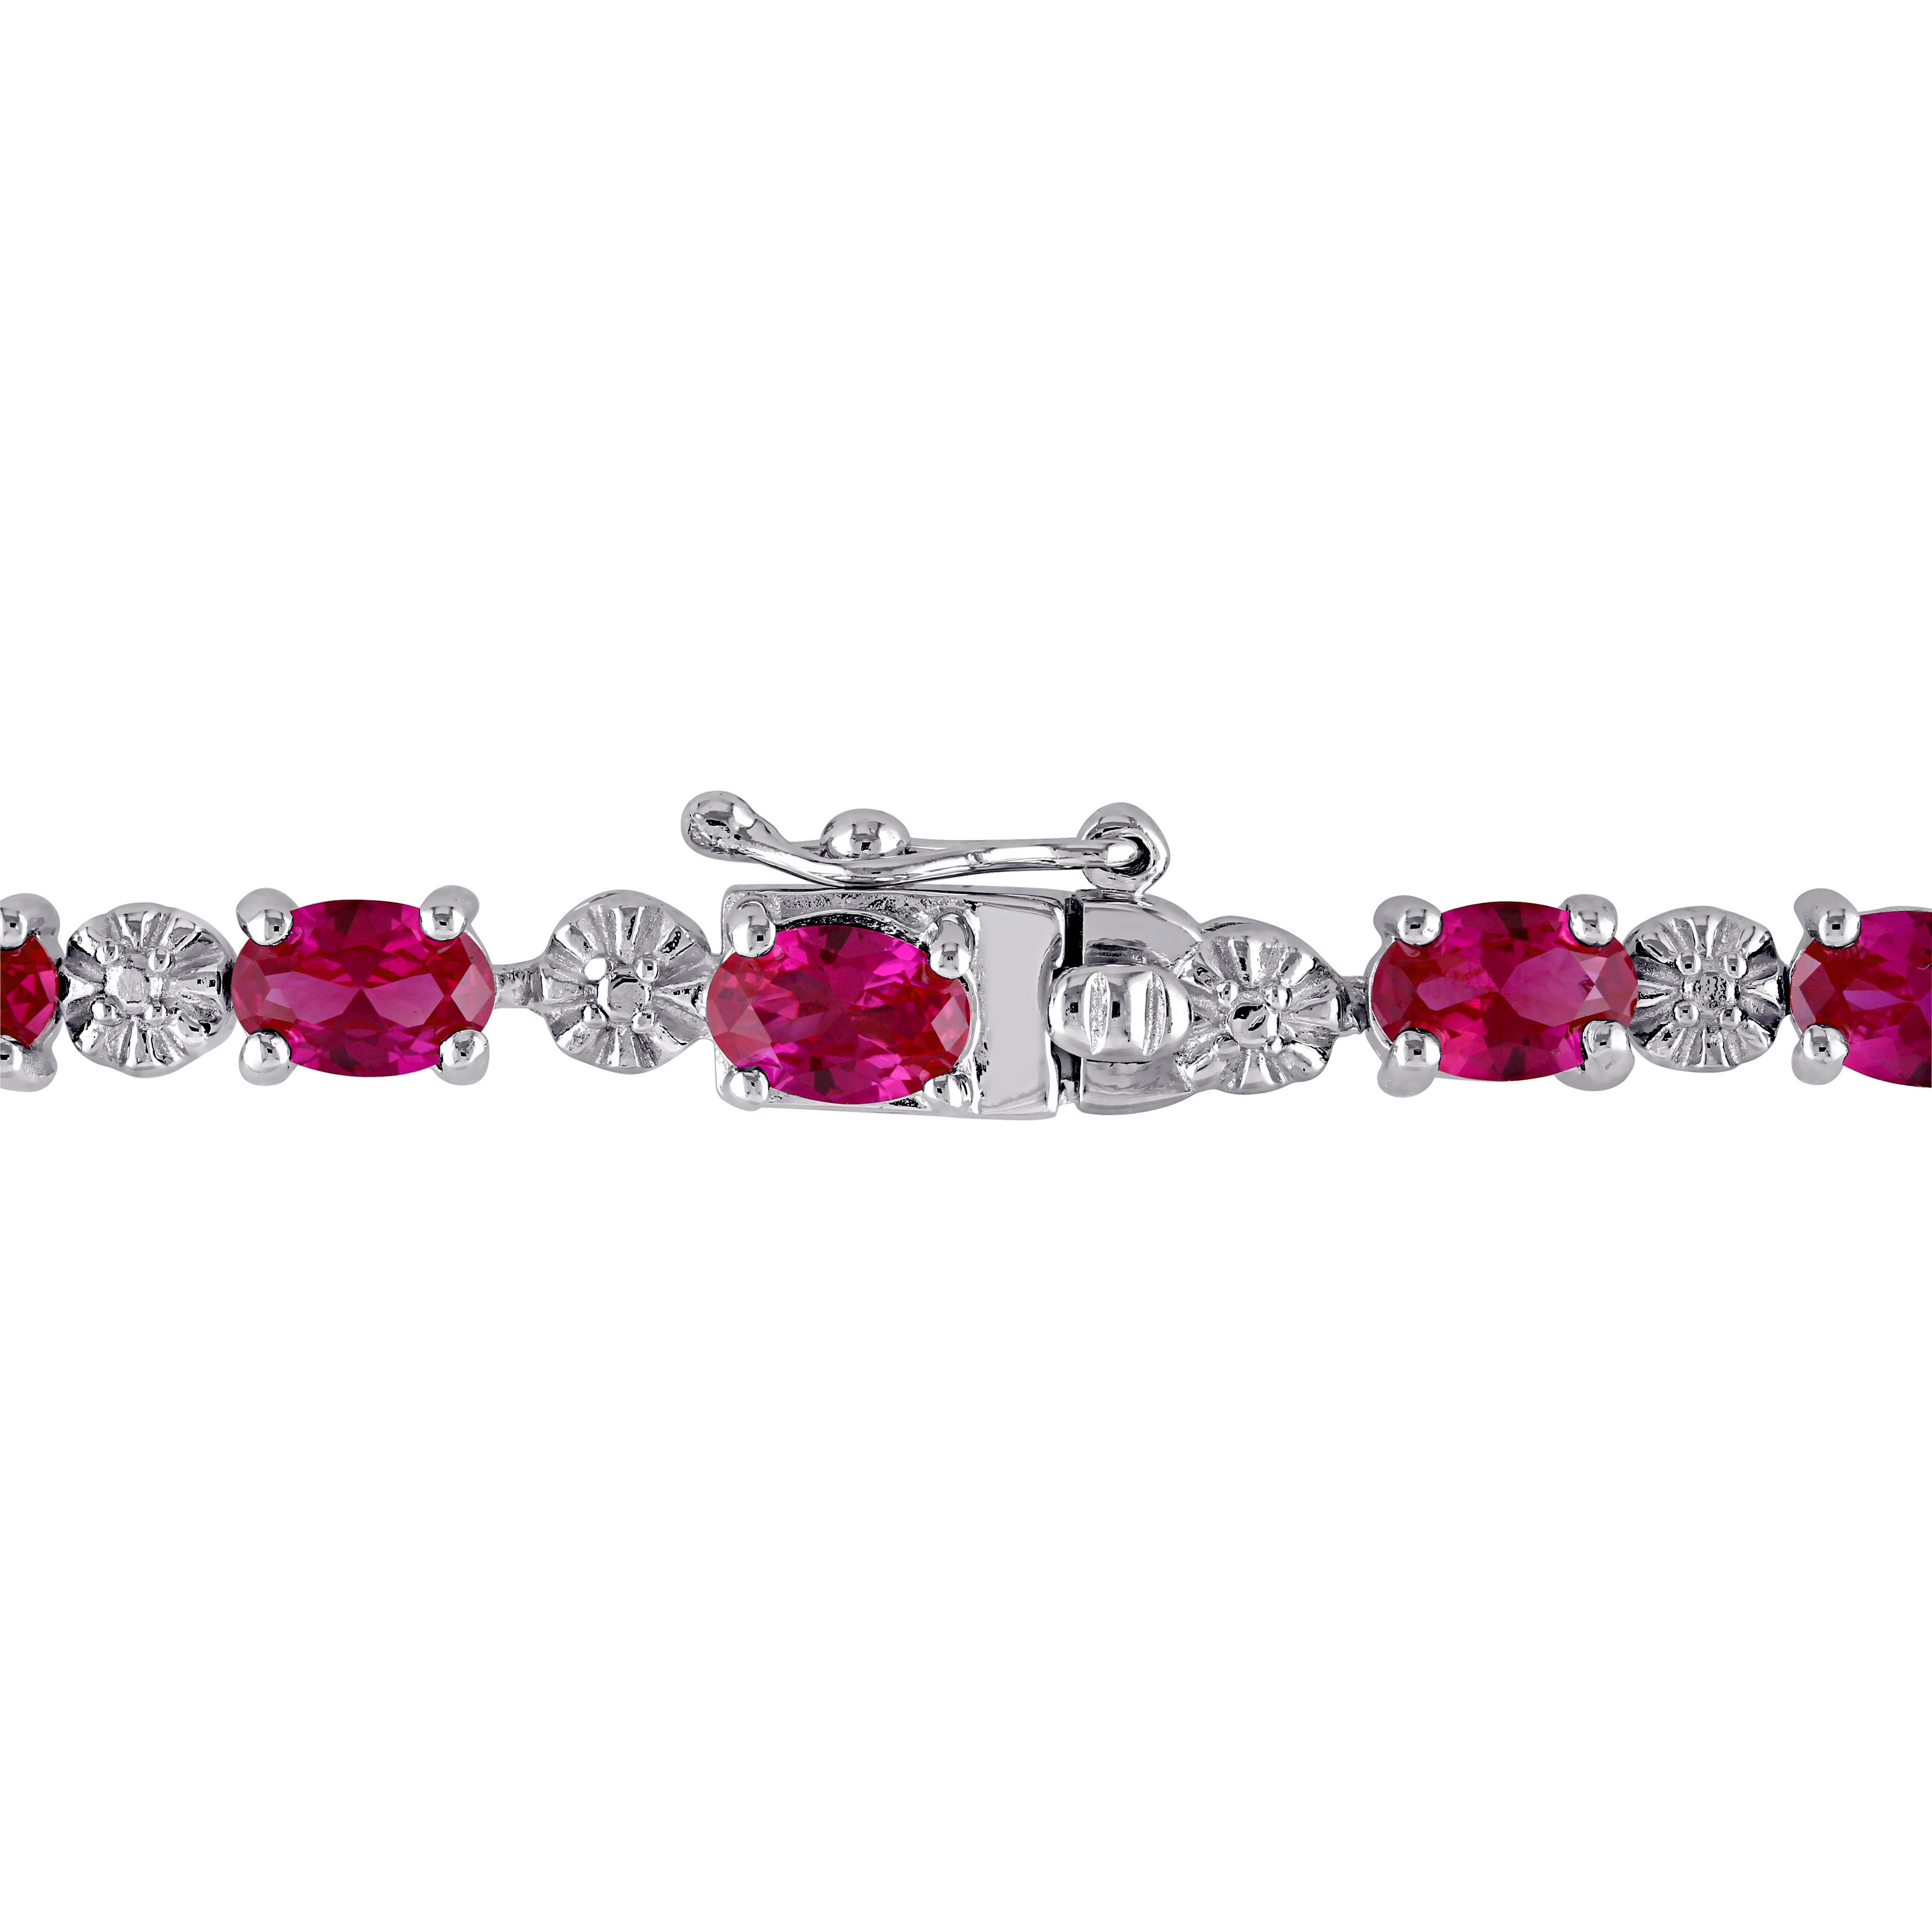 13 1/2 CT TGW Created Ruby and Diamond Bracelet in Sterling Silver - 7.25 in.